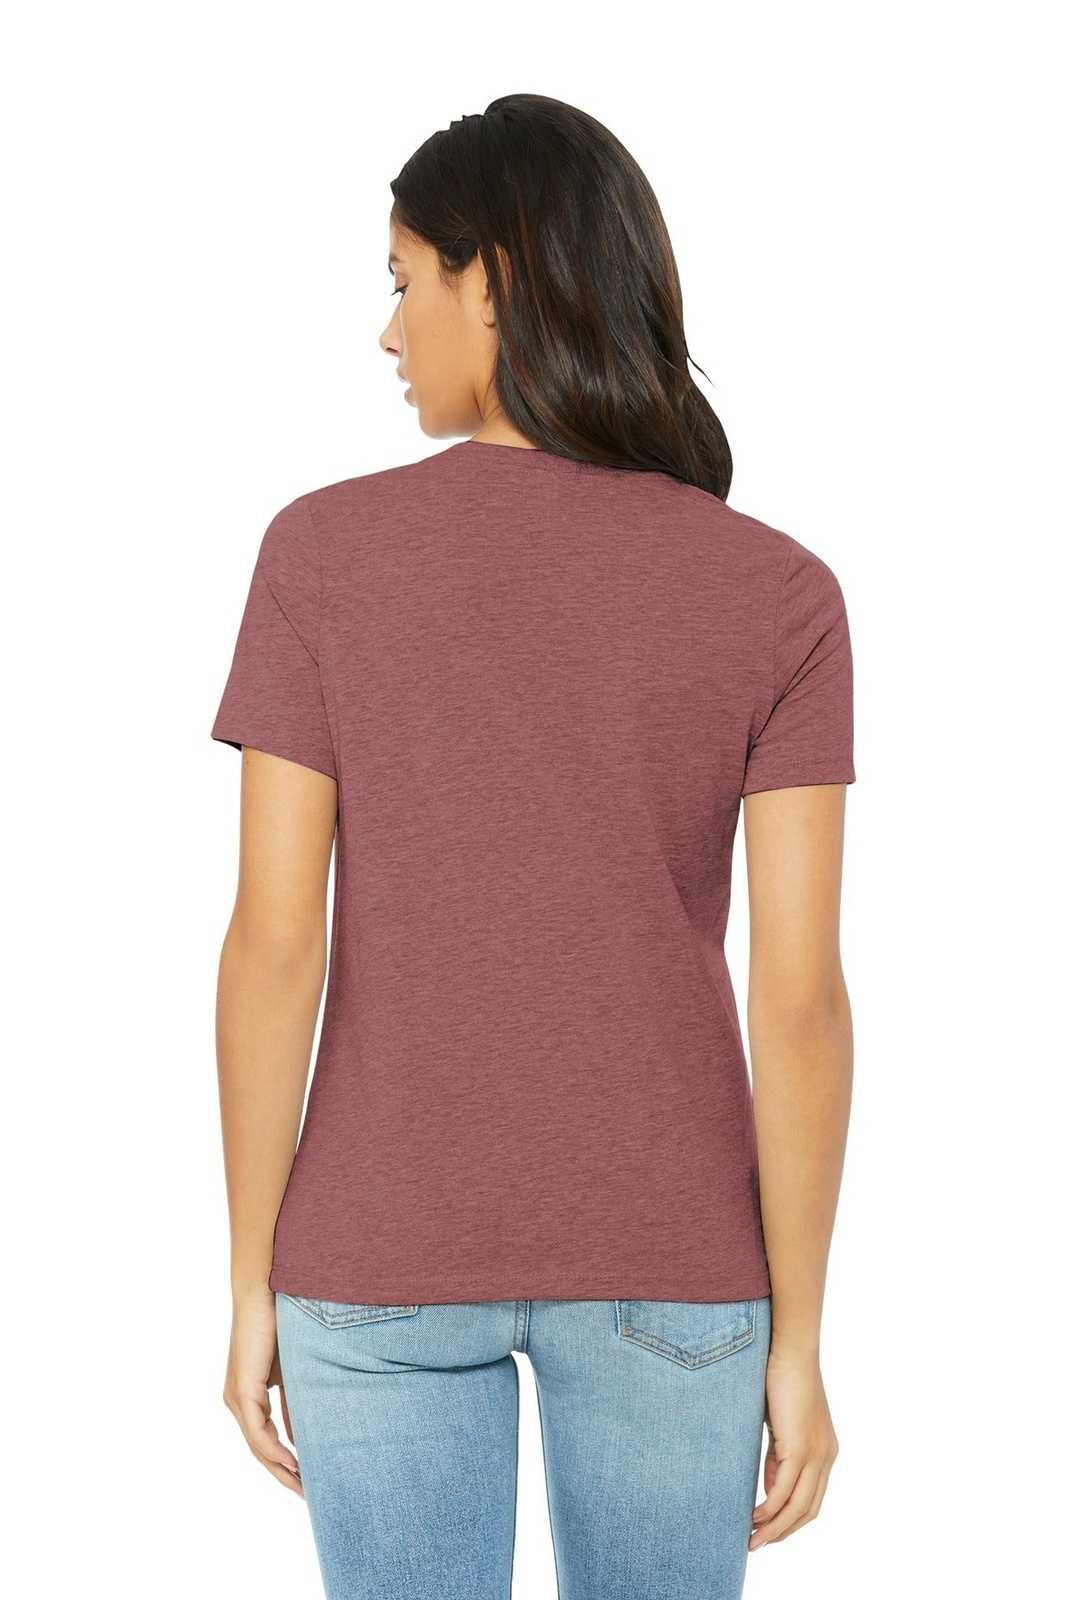 Bella + Canvas 6400 Women's Relaxed Jersey Short Sleeve Tee - Heather Mauve - HIT a Double